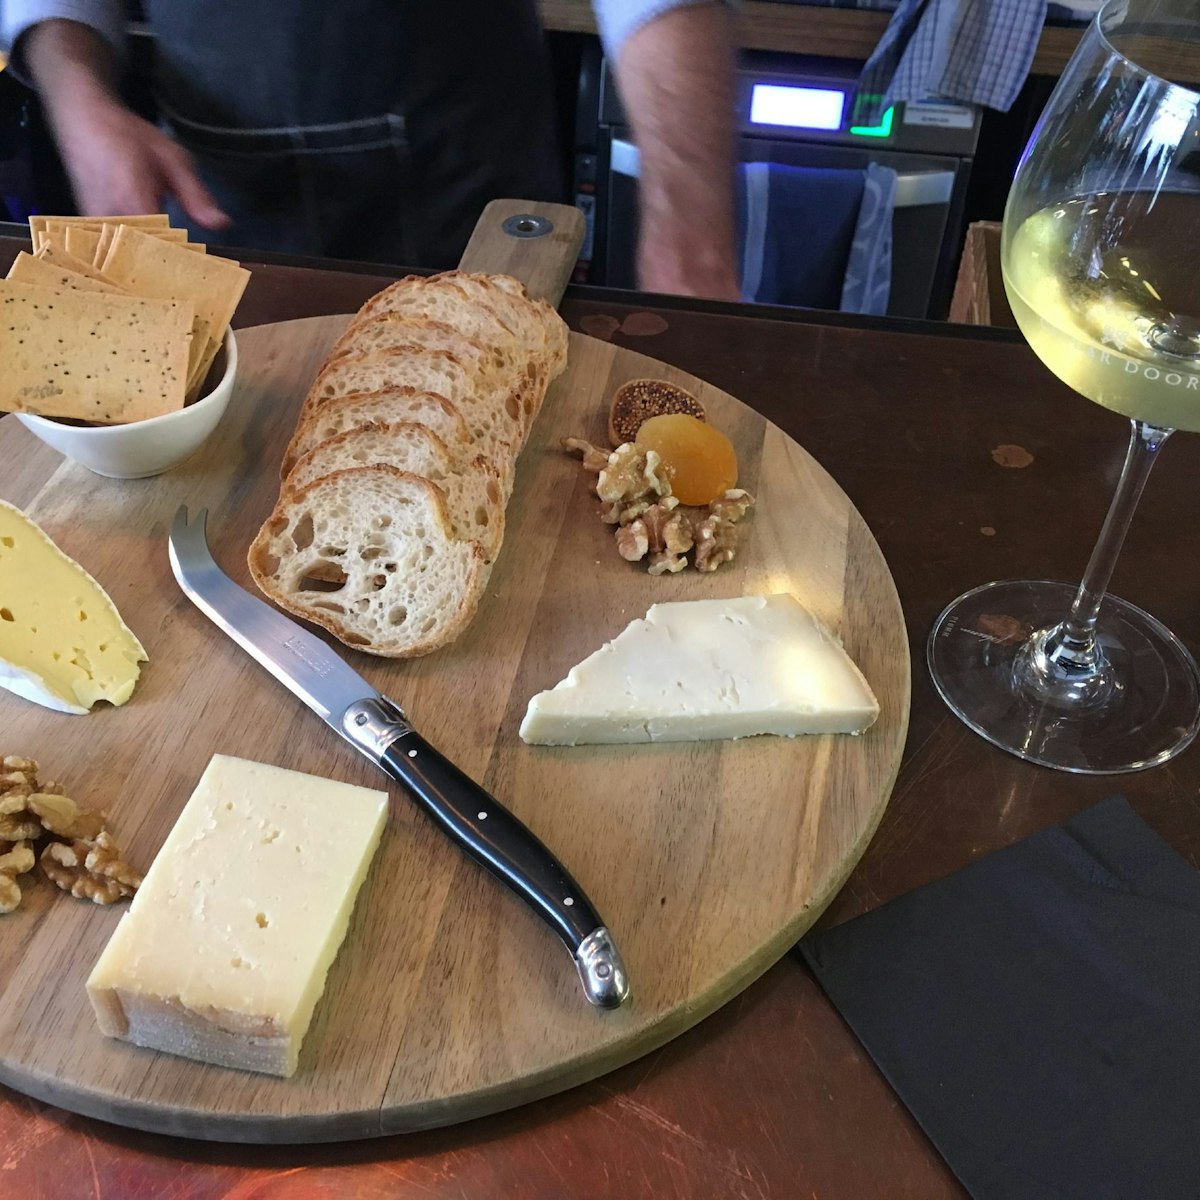 cheese platter and wine at the Geelong Cellar Door (quality may only be ok for article, taken on iPhone).